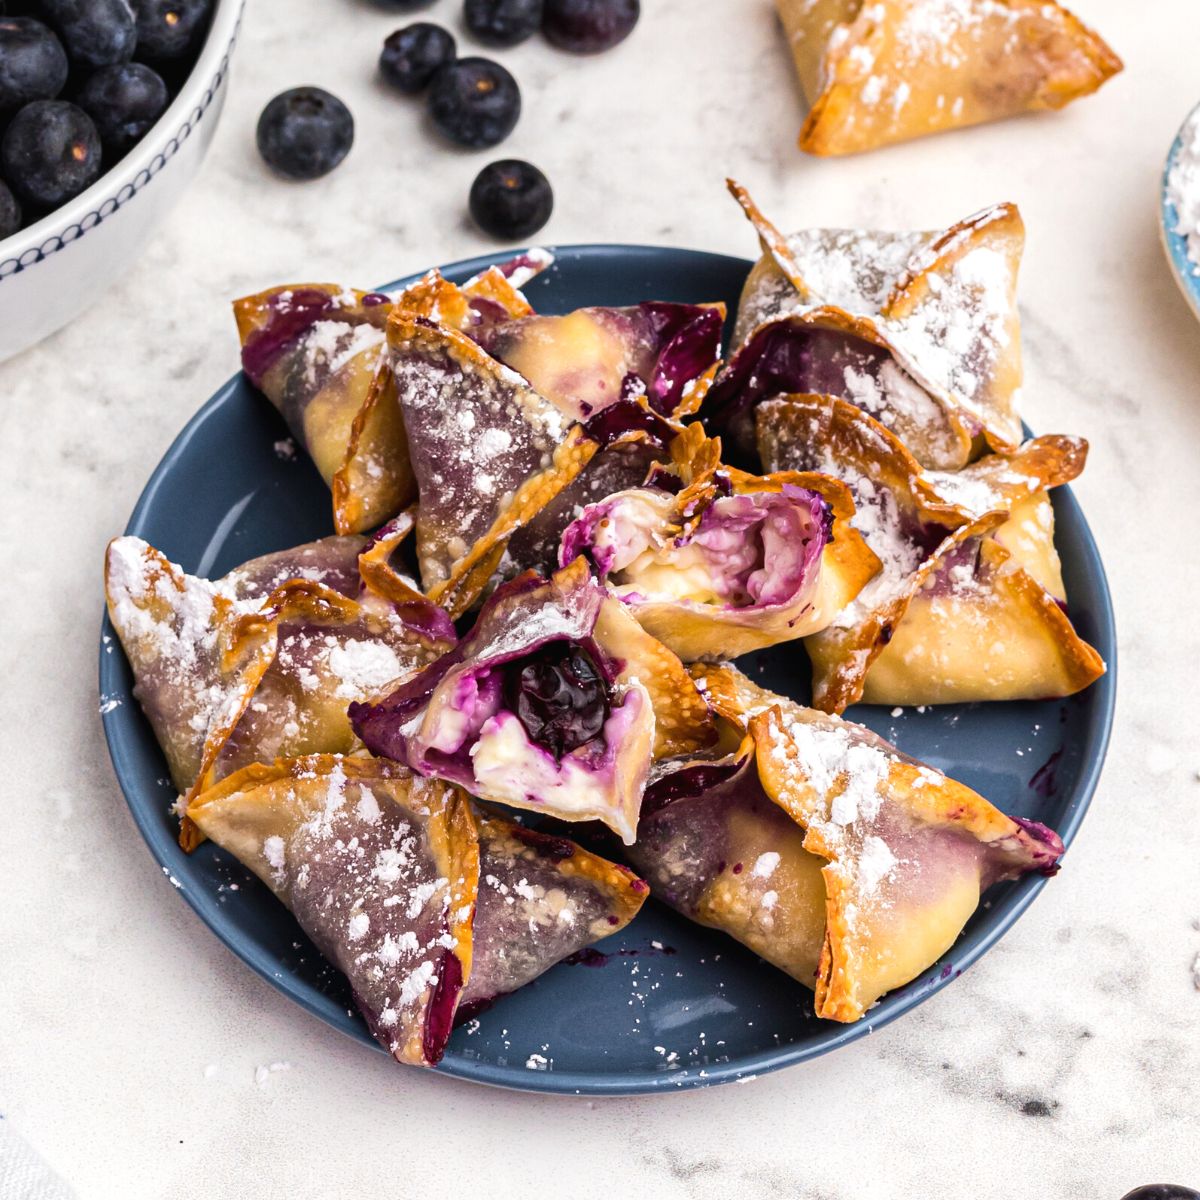 Crispy golden wontons filled with blueberry cheesecake filling on a blue plate.